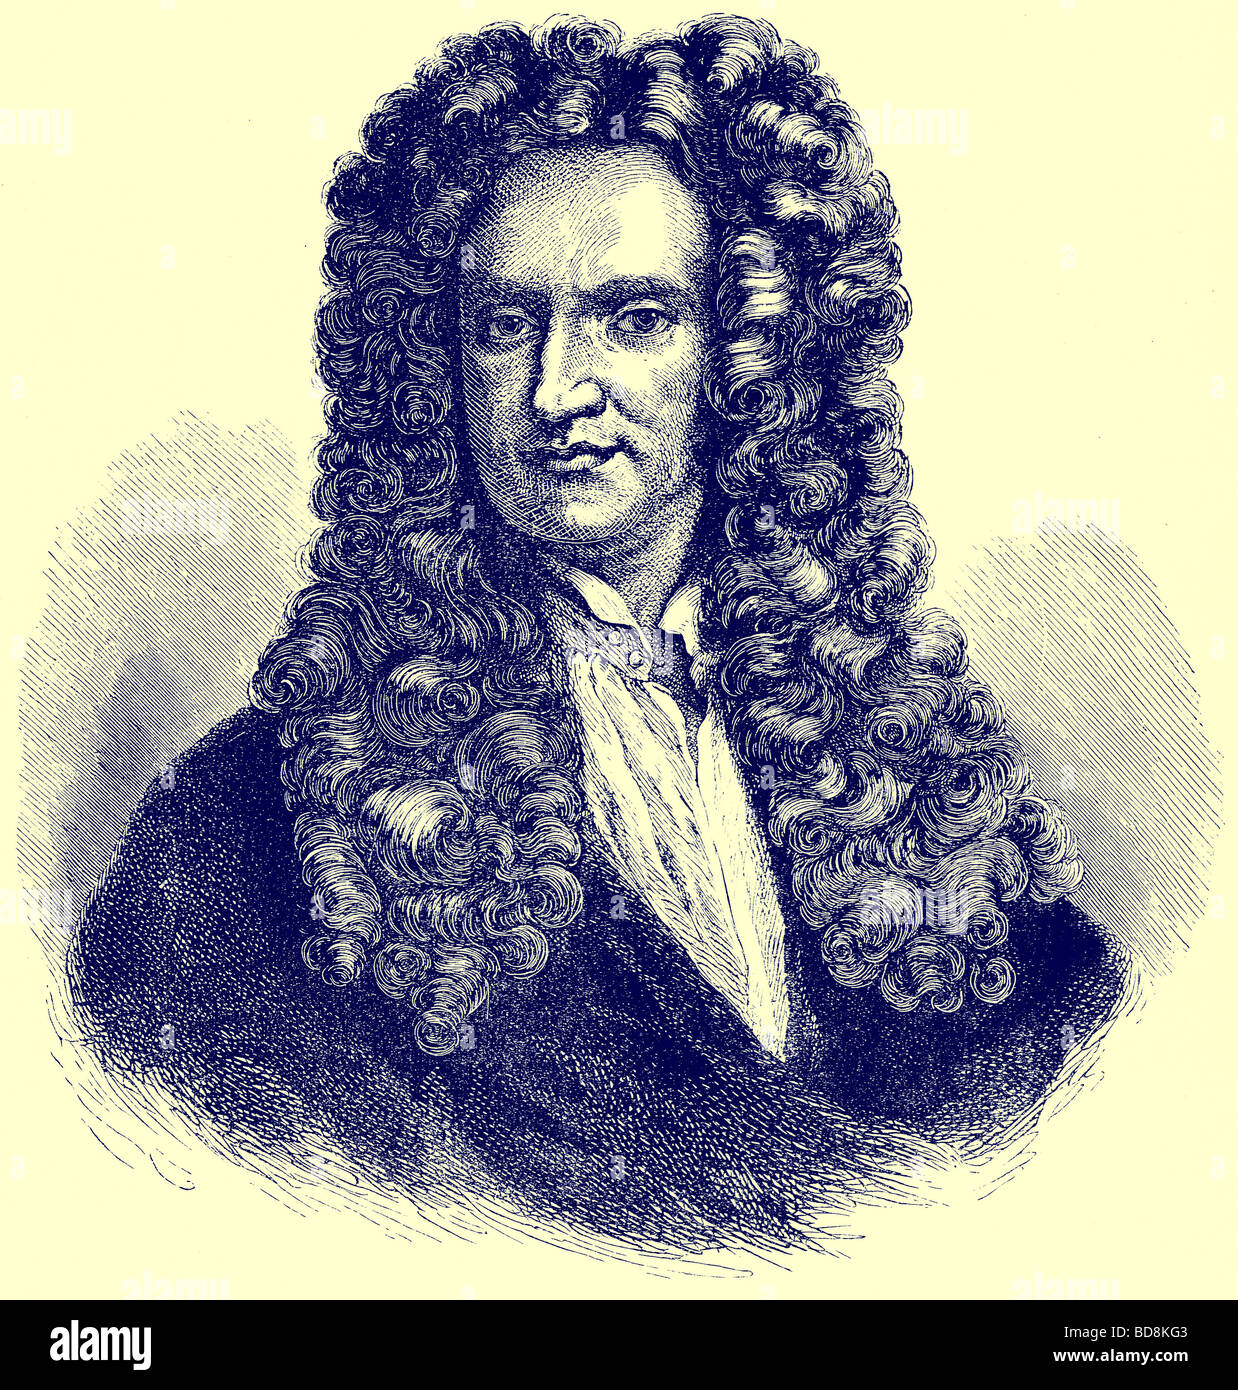 65 Sir Isaac Newton Drawing Stock Photos HighRes Pictures and Images   Getty Images